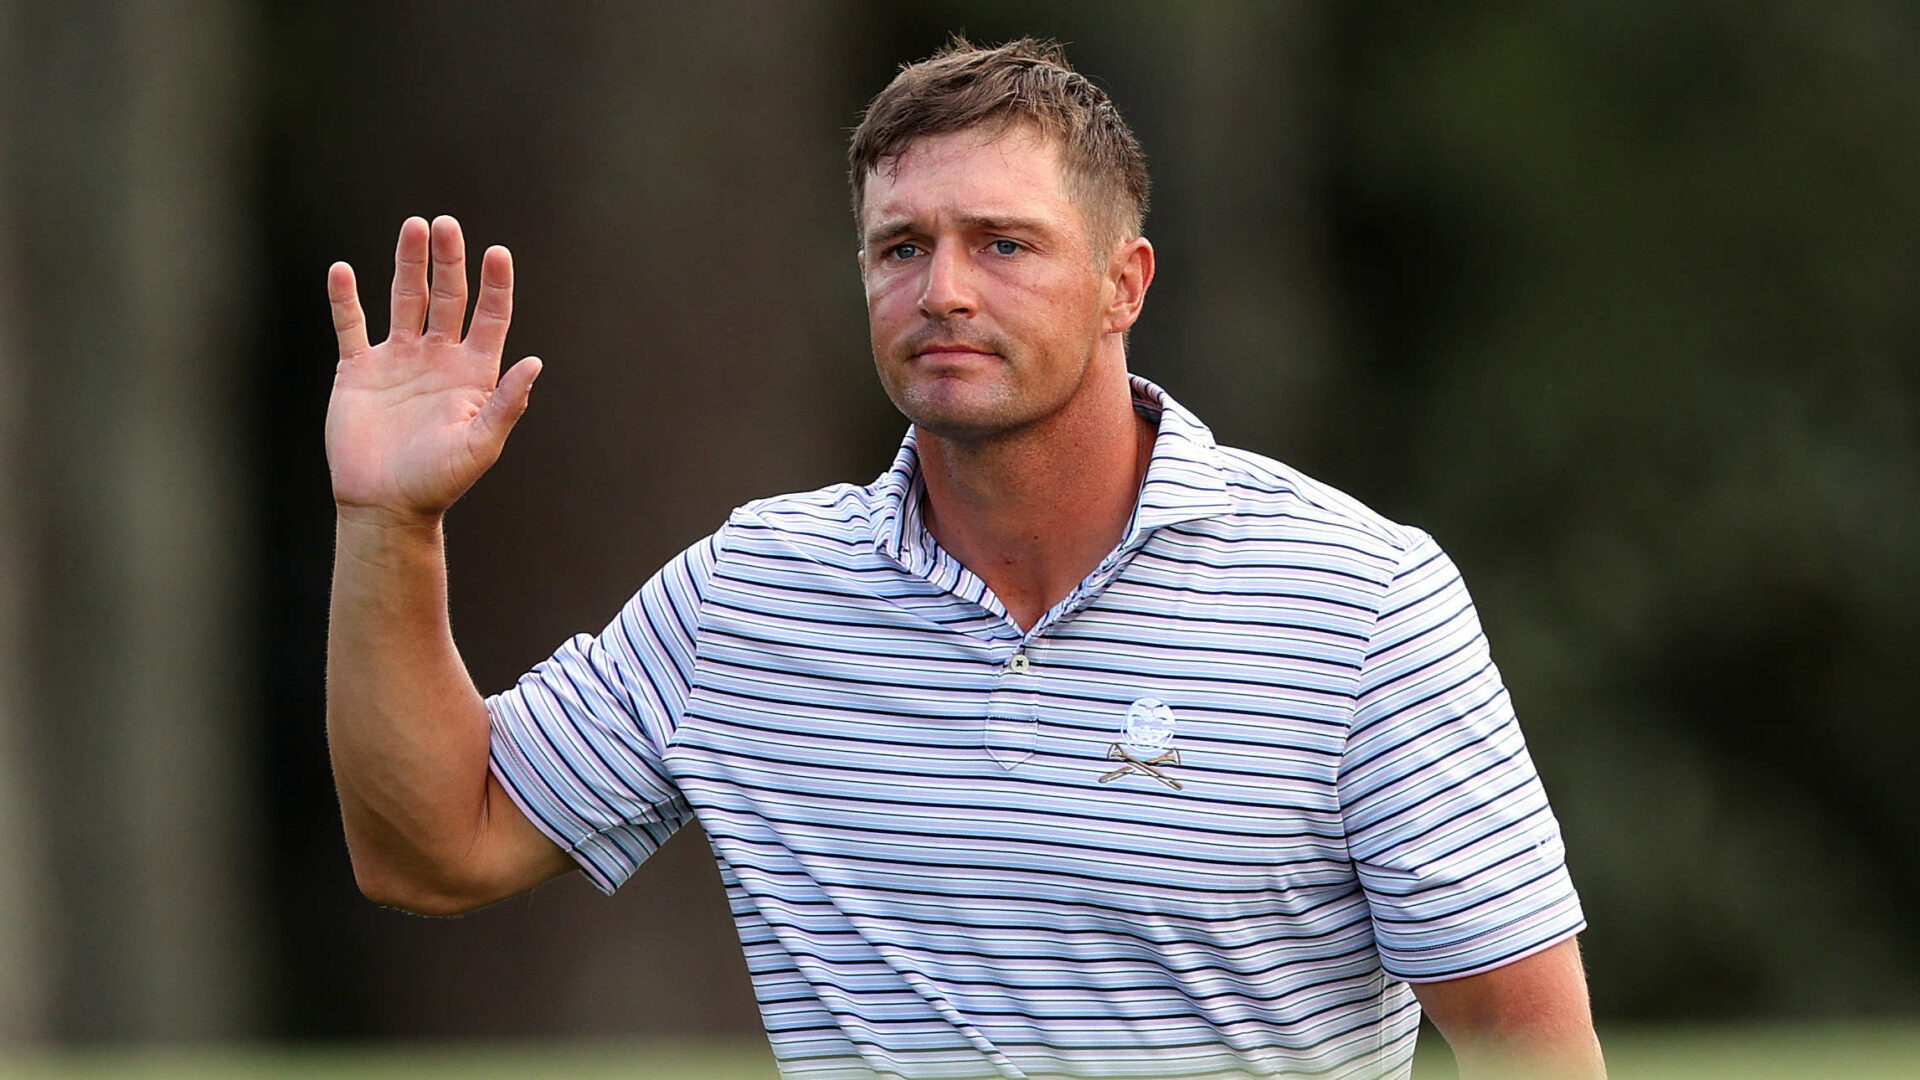 AUGUSTA, GEORGIA - APRIL 11: Bryson DeChambeau of the United States waves to the patrons on the 18th green during the first round of the 2024 Masters Tournament at Augusta National Golf Club on April 11, 2024 in Augusta, Georgia. (Photo by Andrew Redington/Getty Images)